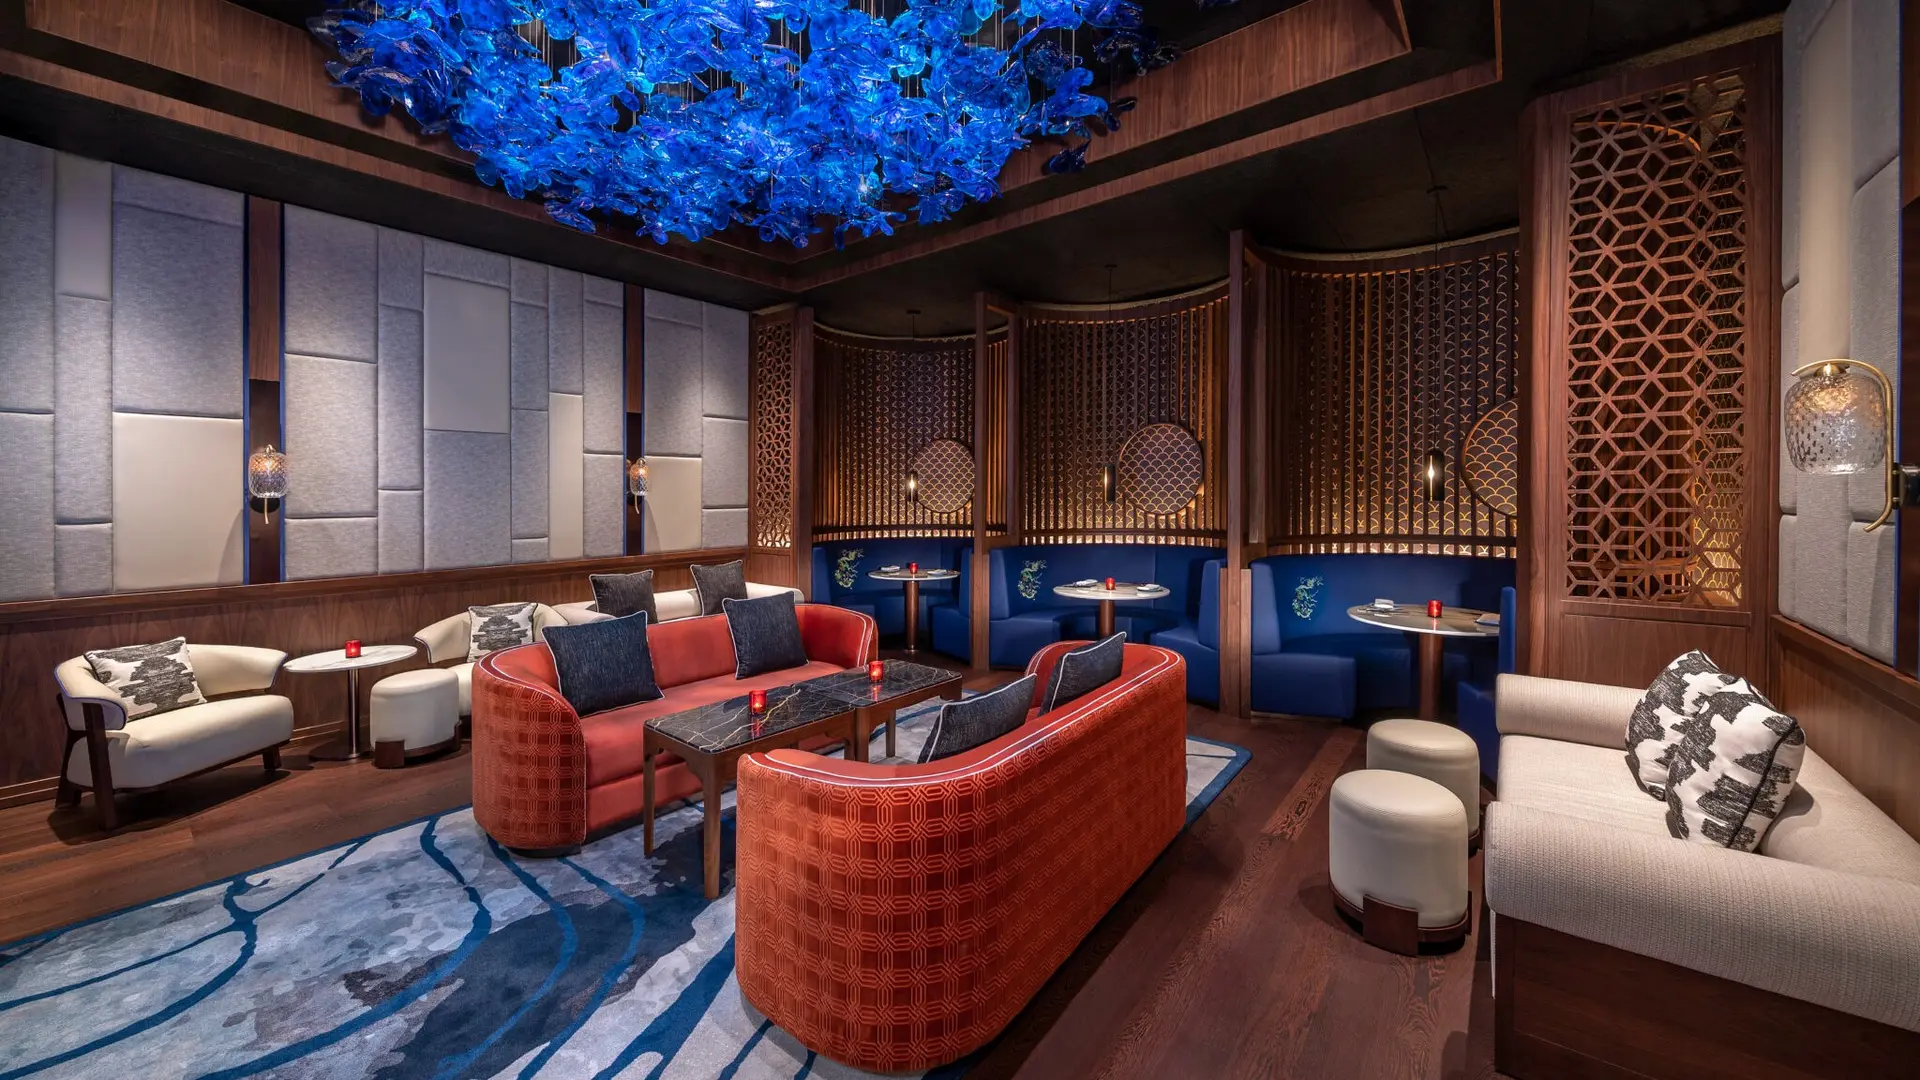 Hakkasan resturant in dubai with red and blue couches 